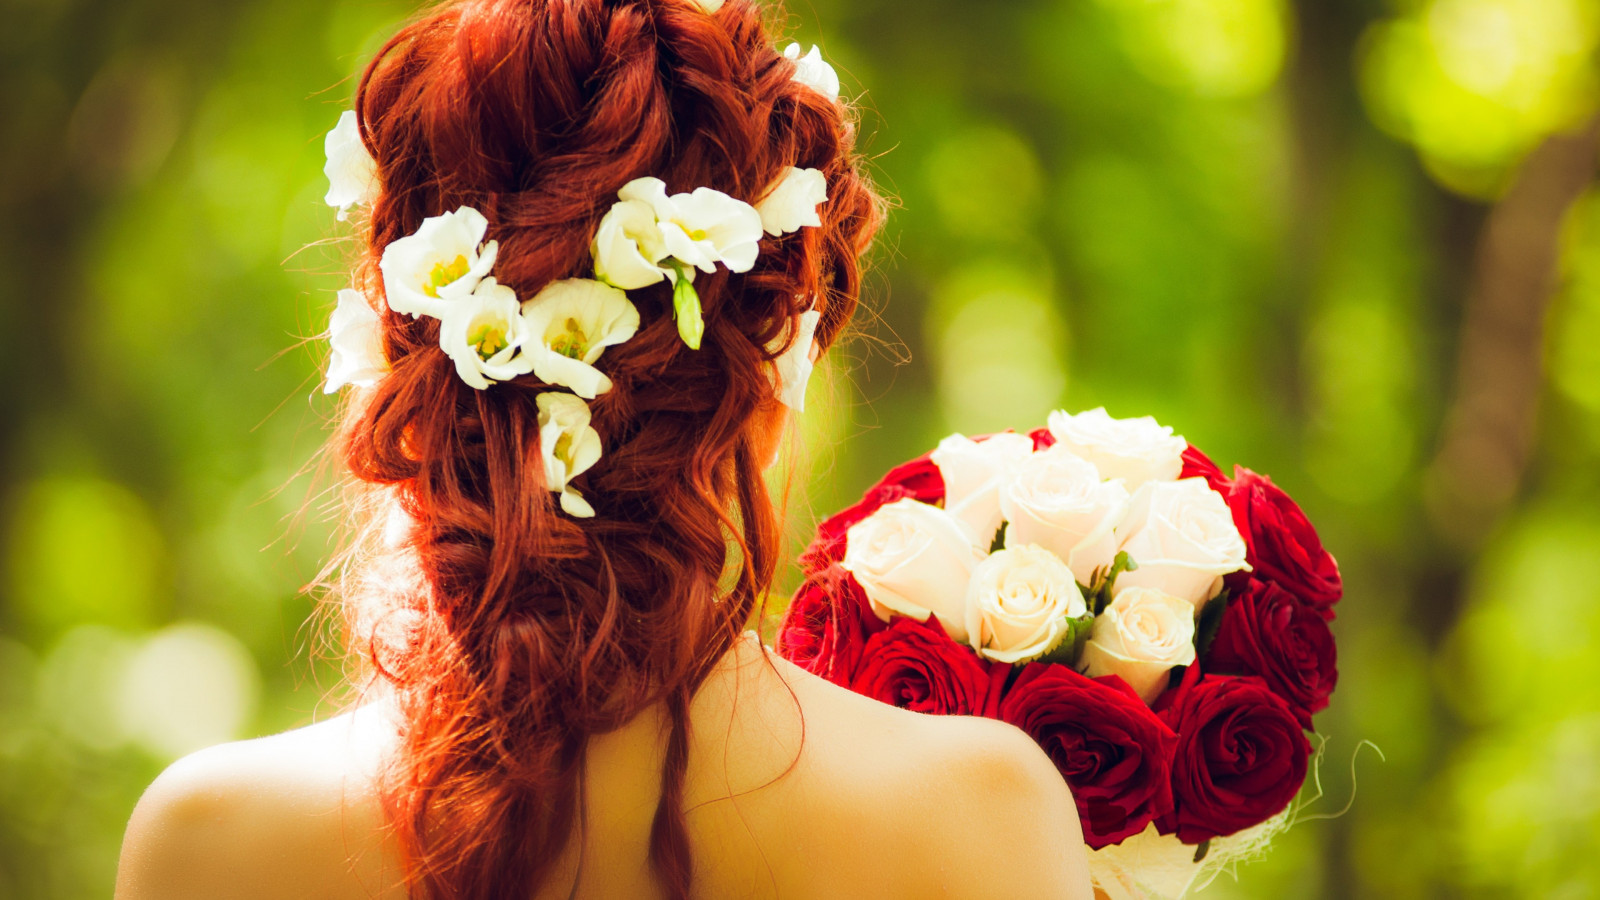 Bride and wedding flowers wallpaper 1600x900